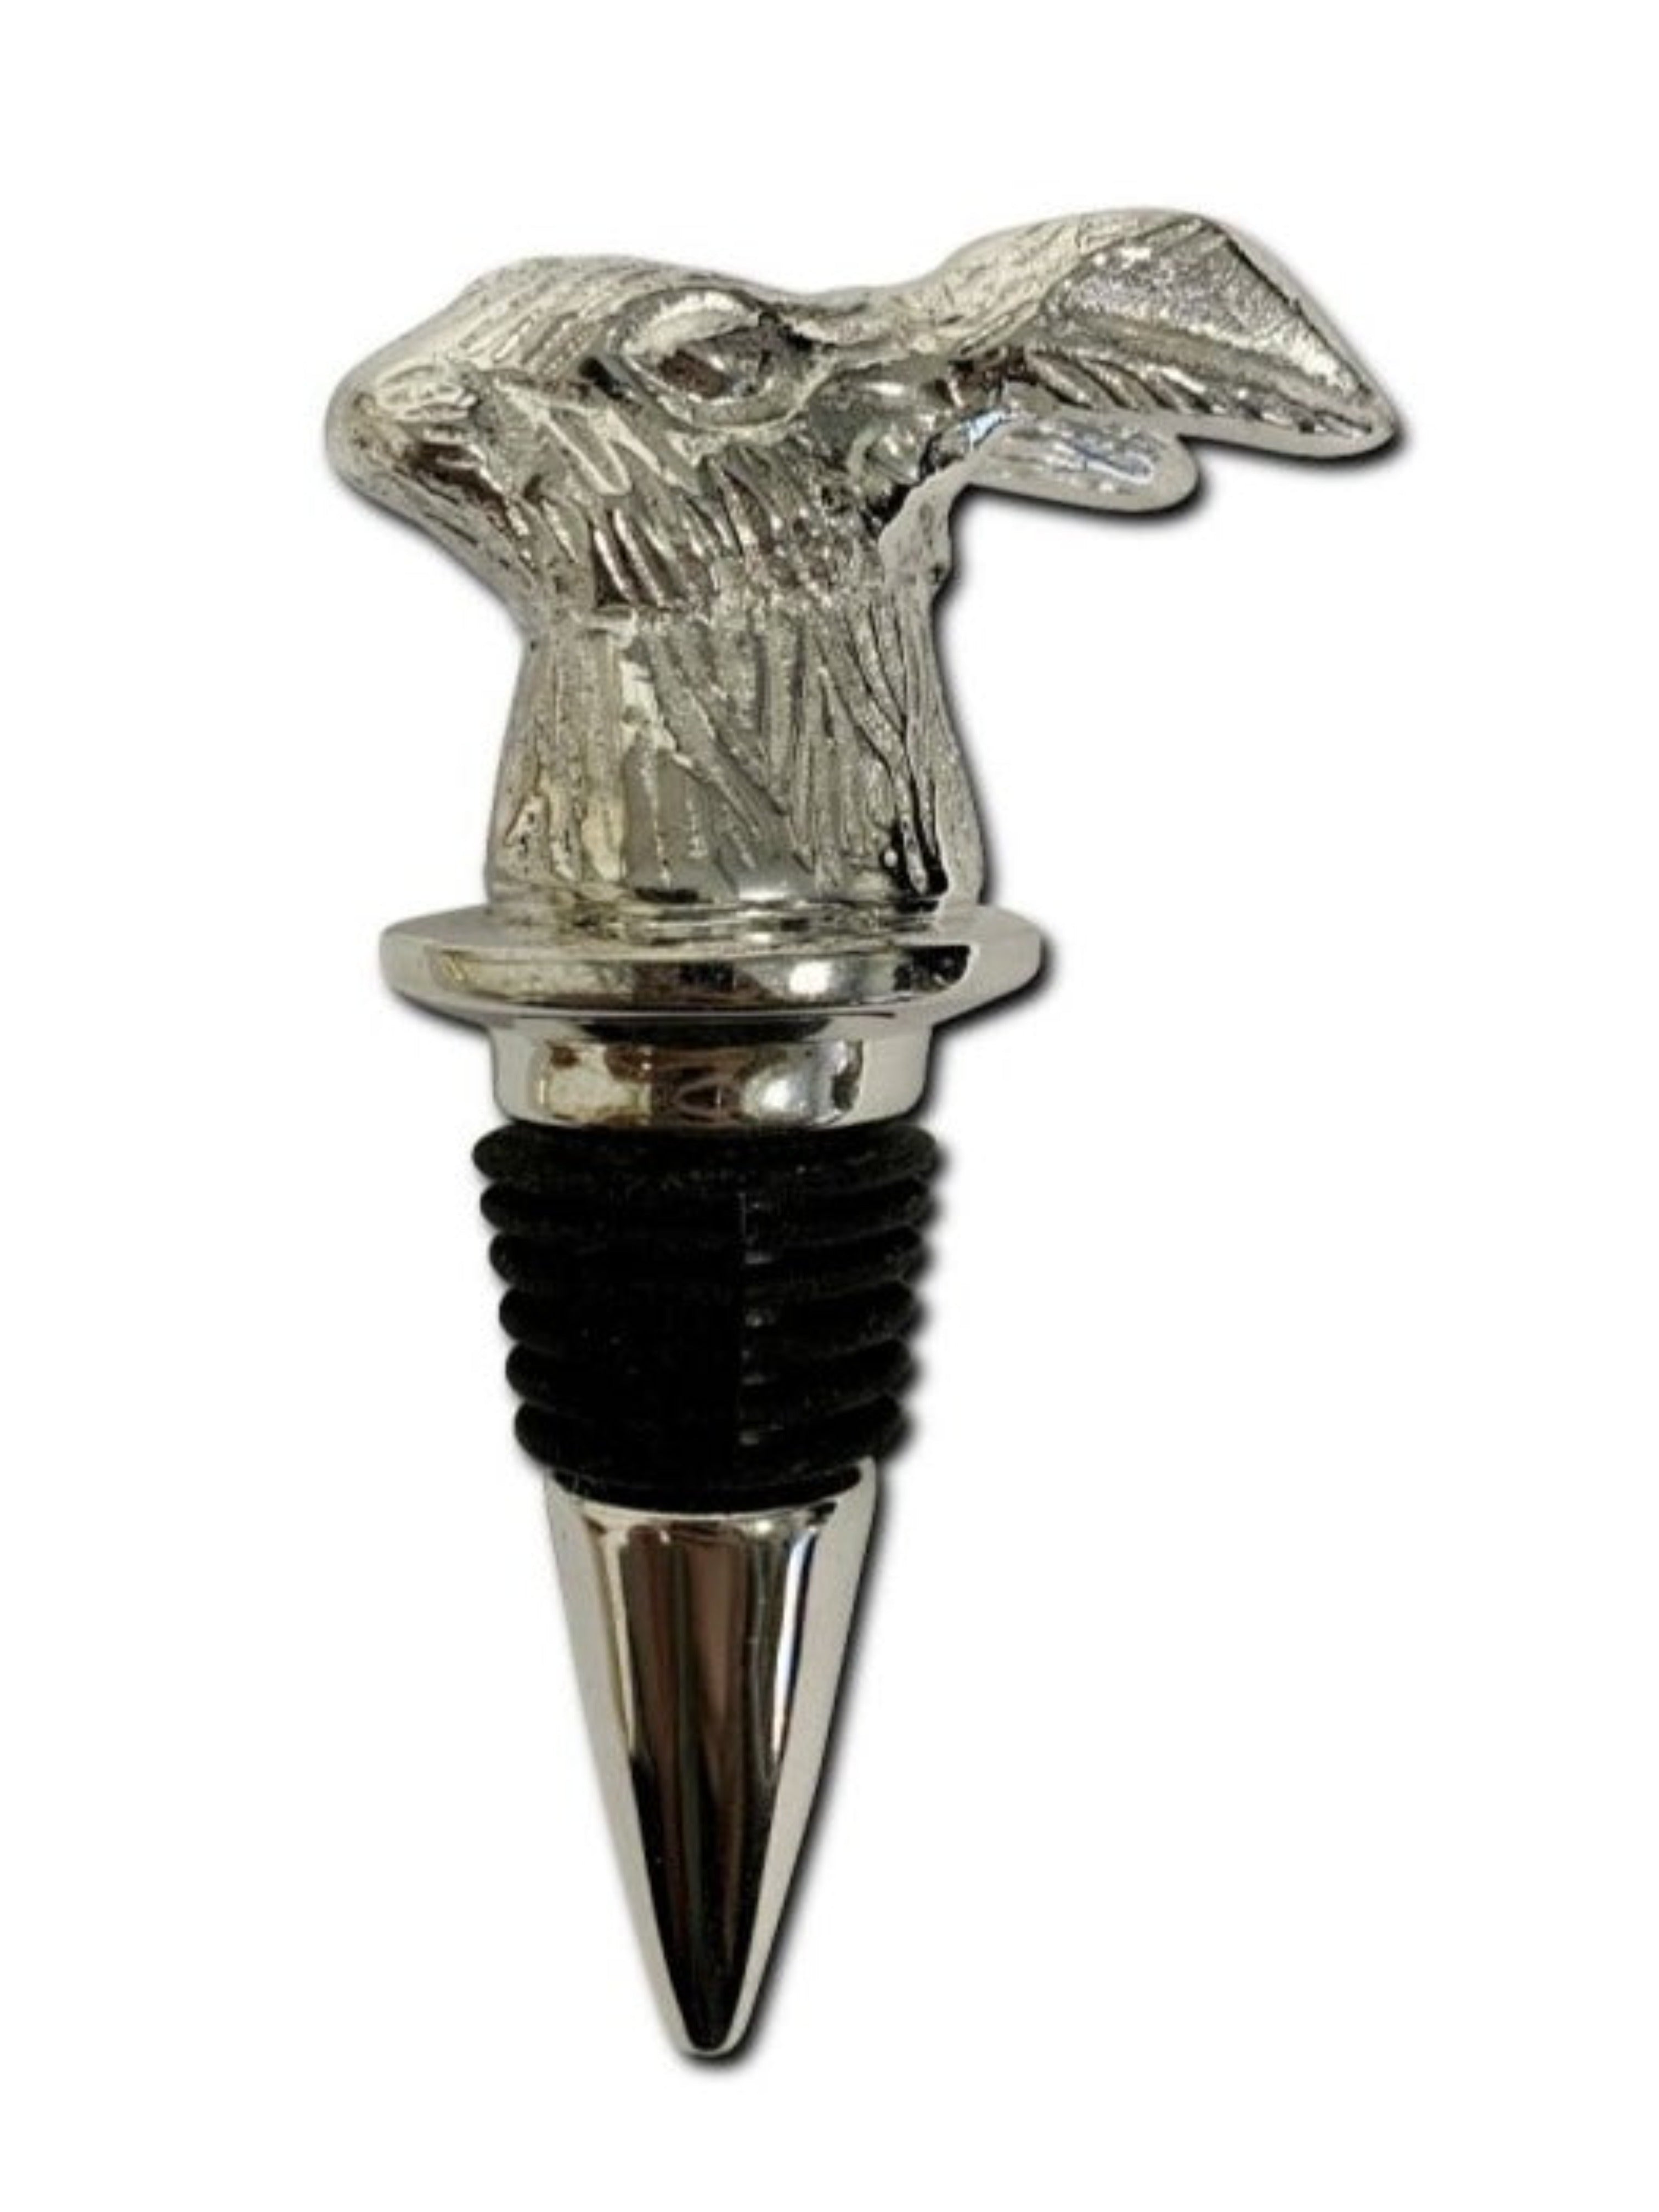 Culinary Concepts Rabbit Bottle Stopper